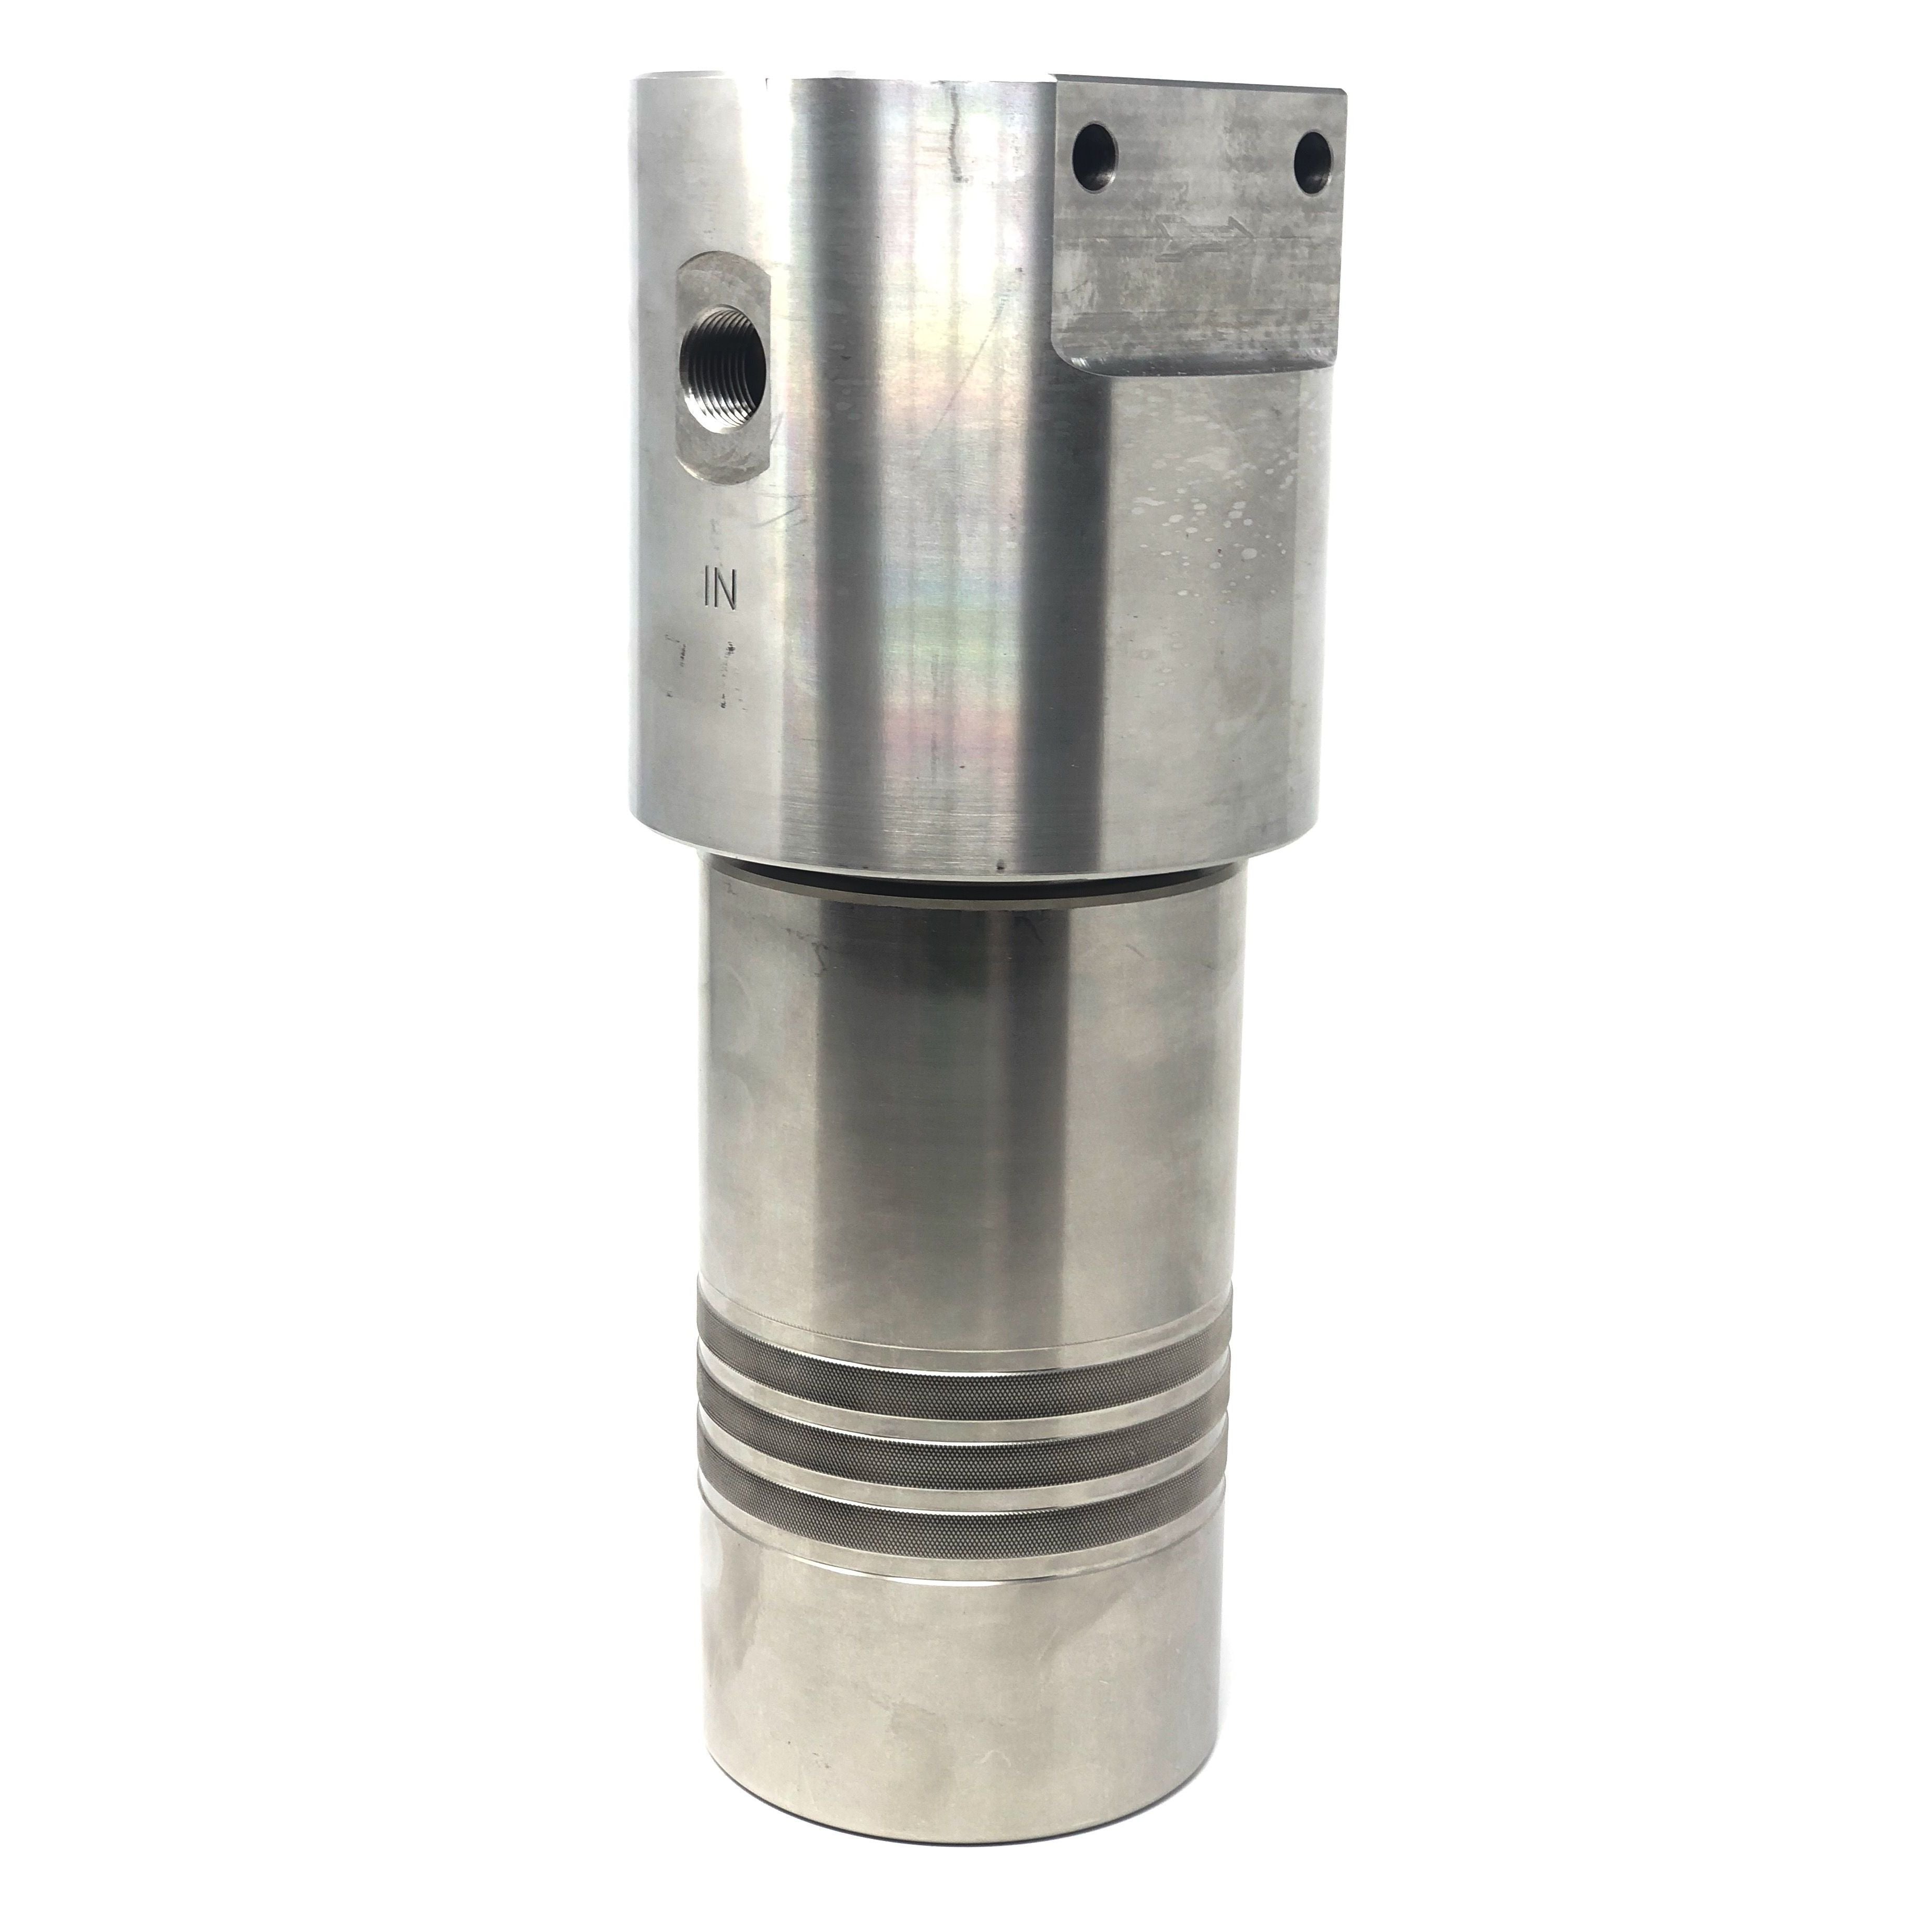 52S-168S-25SEN : Chase Ultra High Pressure Inline Filter, 10000psi, #8 SAE (1/2"), 25 Micron, With Visual Indicator, No Bypass